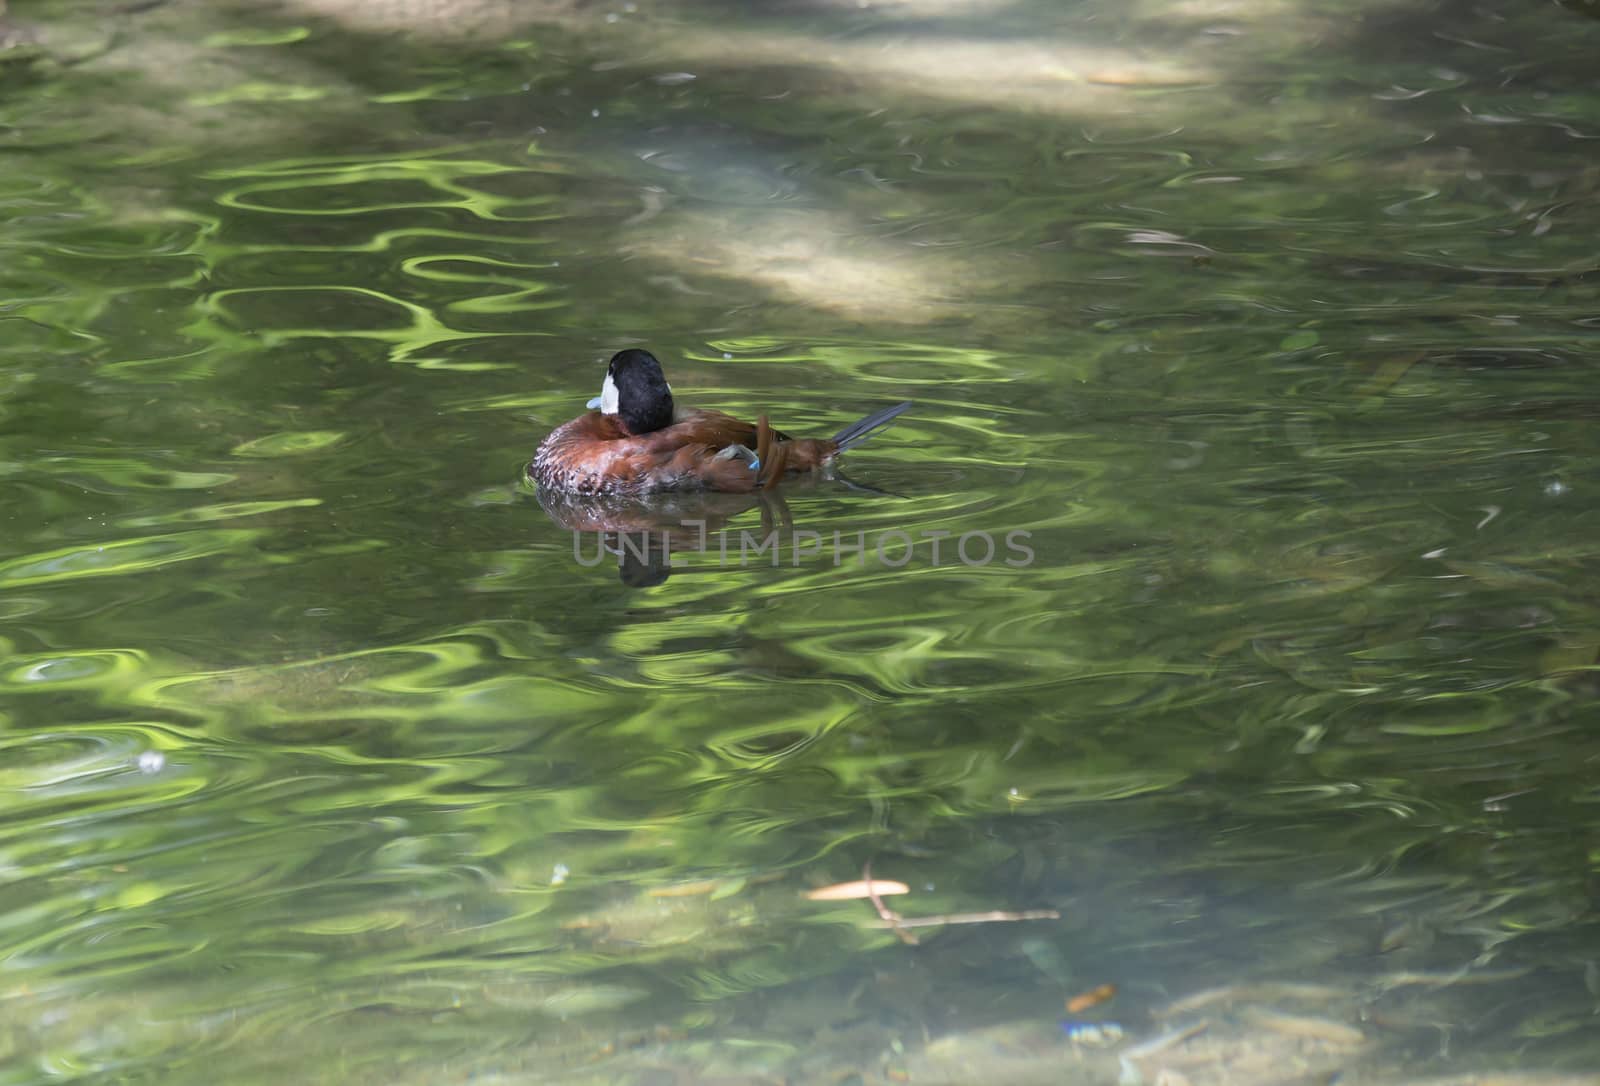 Ruddy duck (Oxyura jamaicensis) in a small pond